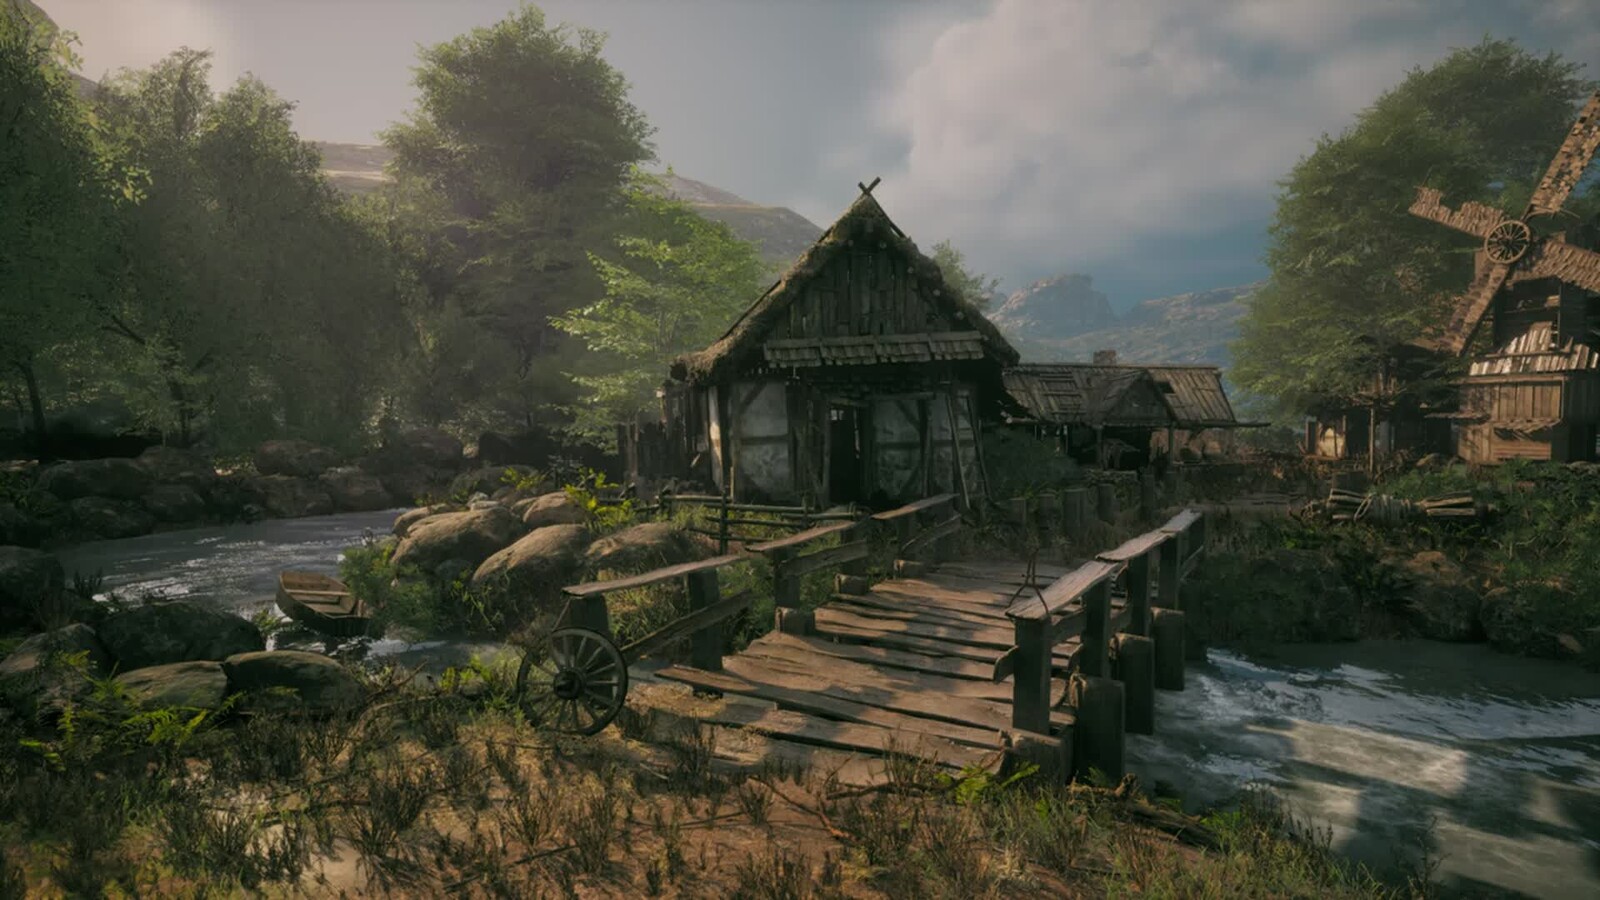 Lost Village by 3D Environment in Unreal Engine by student Osama Samir